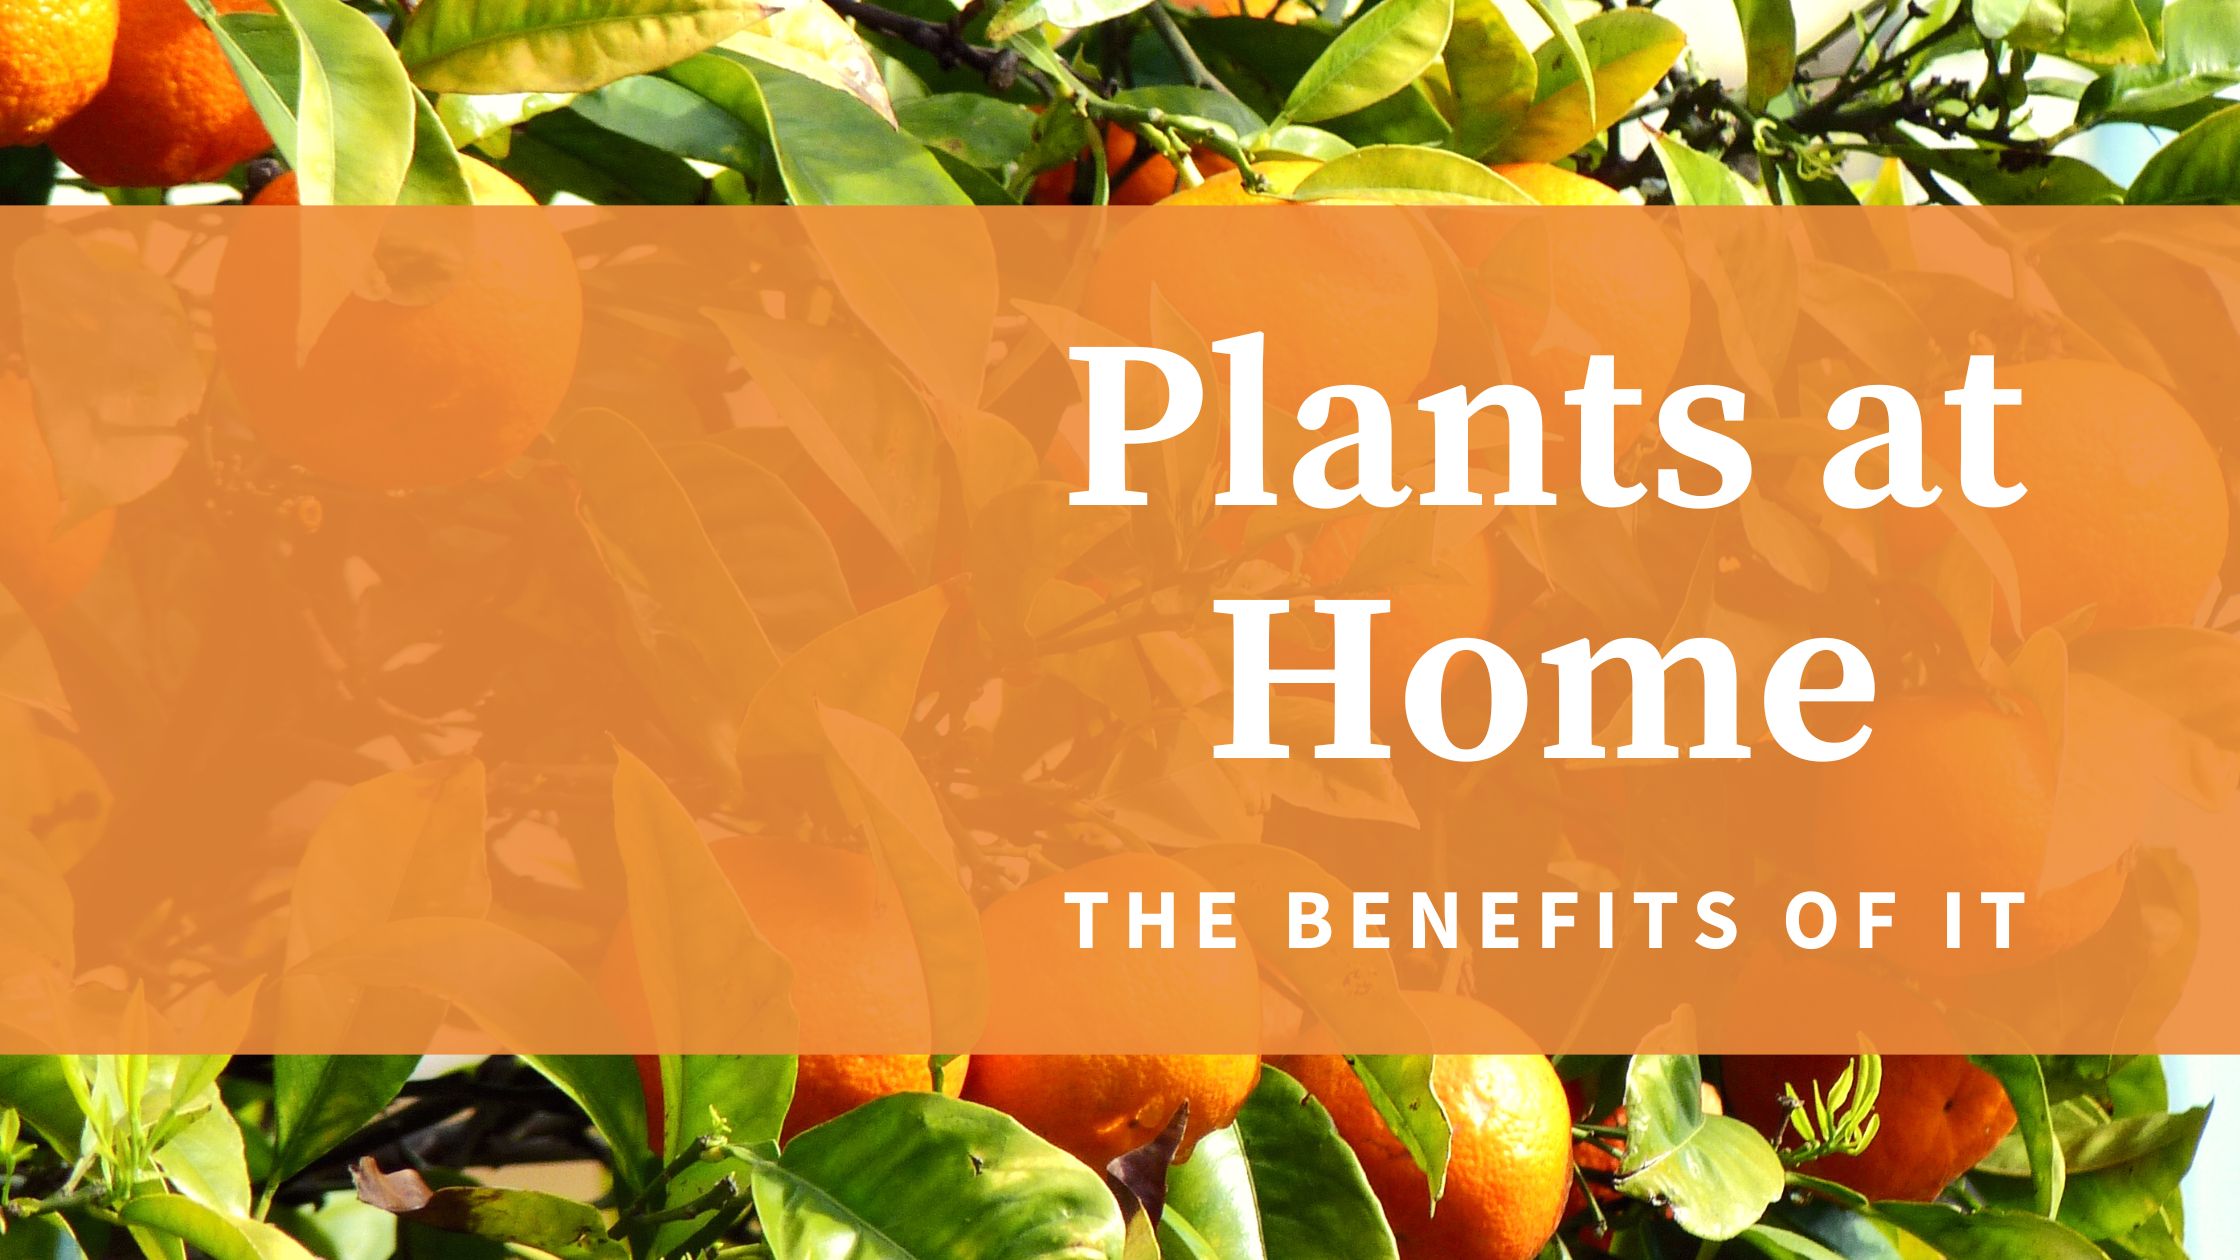 The Benefits of Having Plants at Home